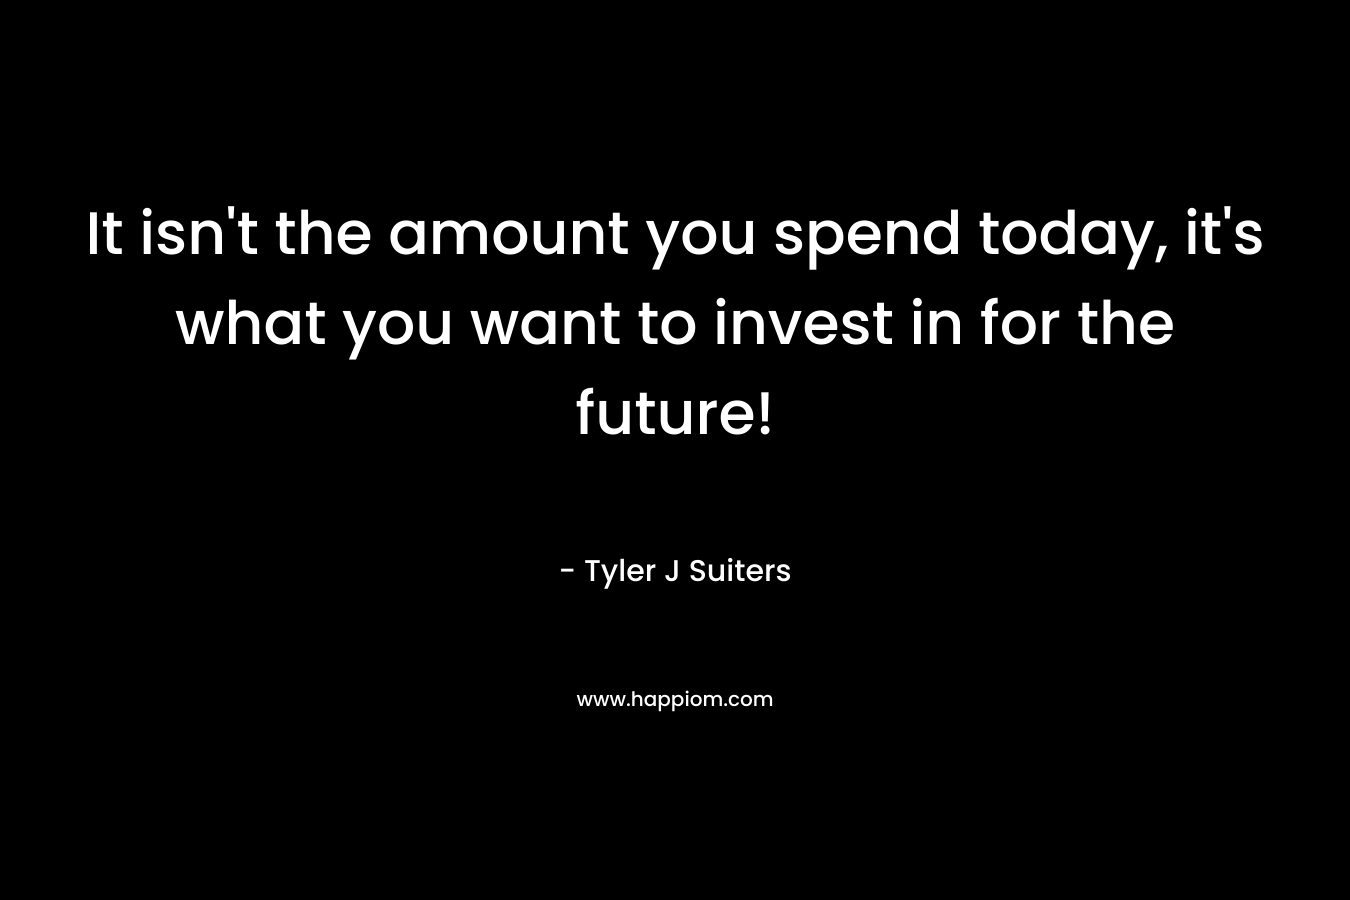 It isn't the amount you spend today, it's what you want to invest in for the future!